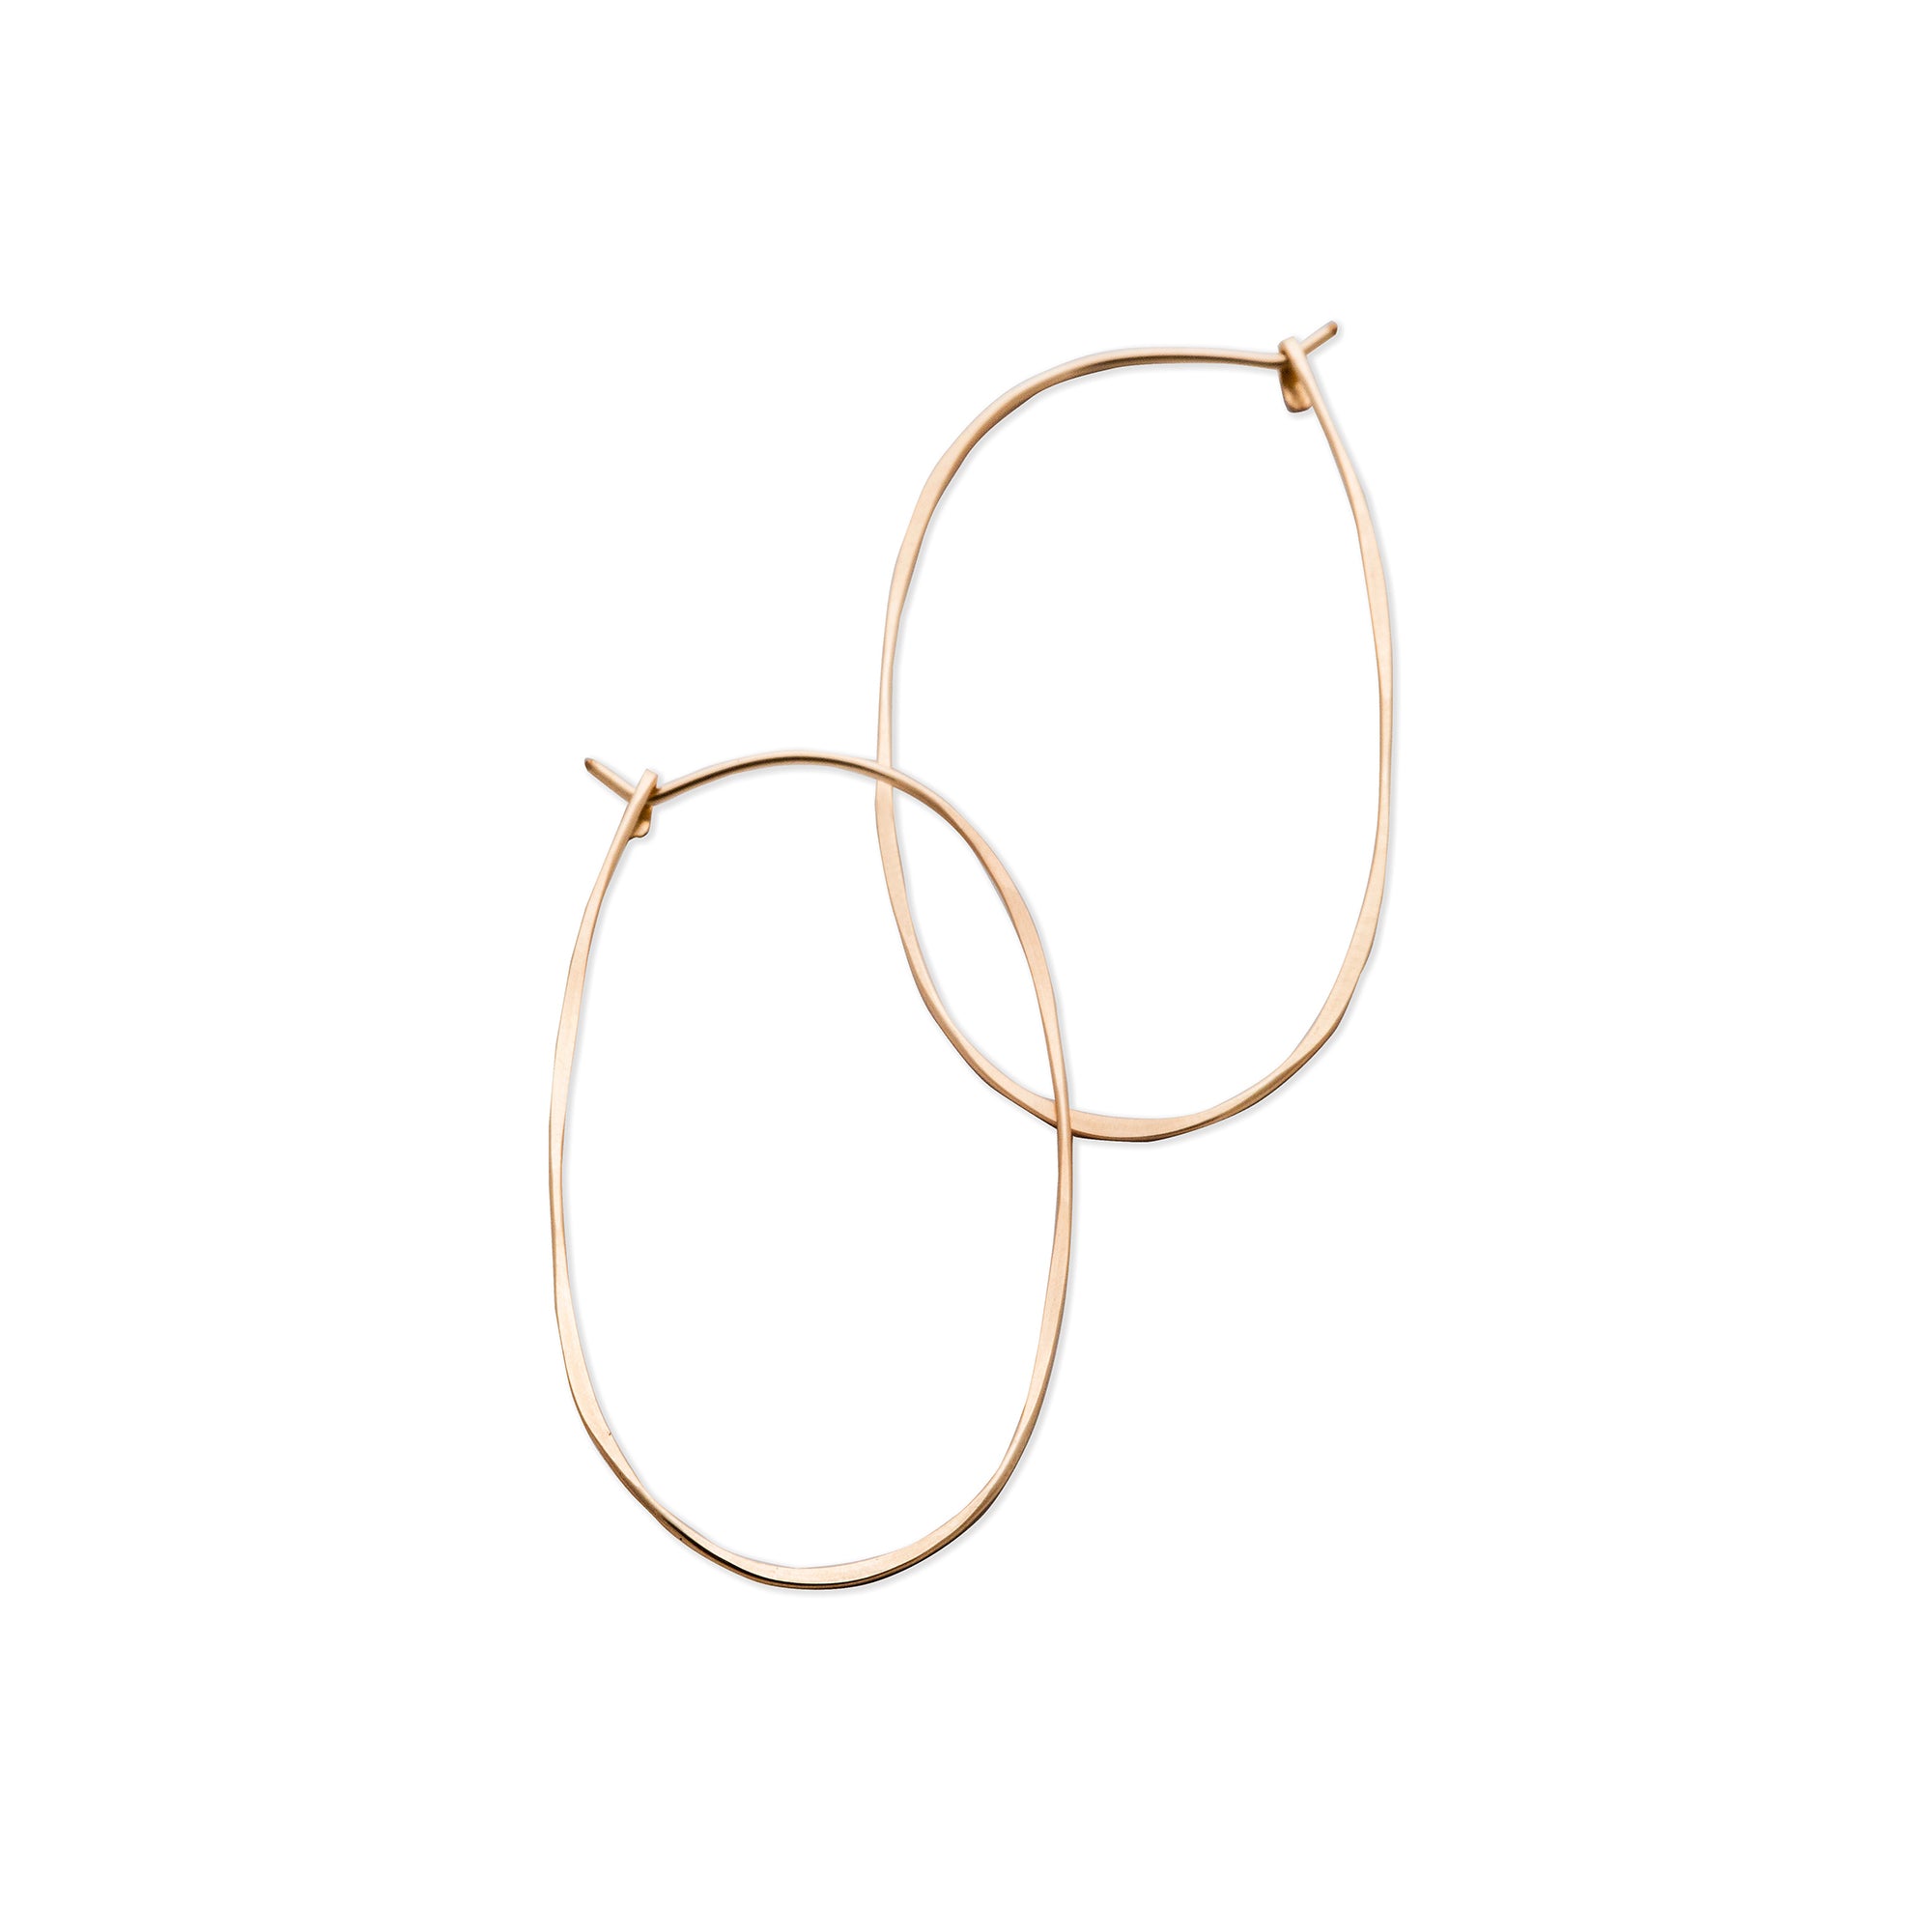 The thin Oval Hoops of hammered gold-fill or sterling silver form a continuous oval that is finished with a hook closure.